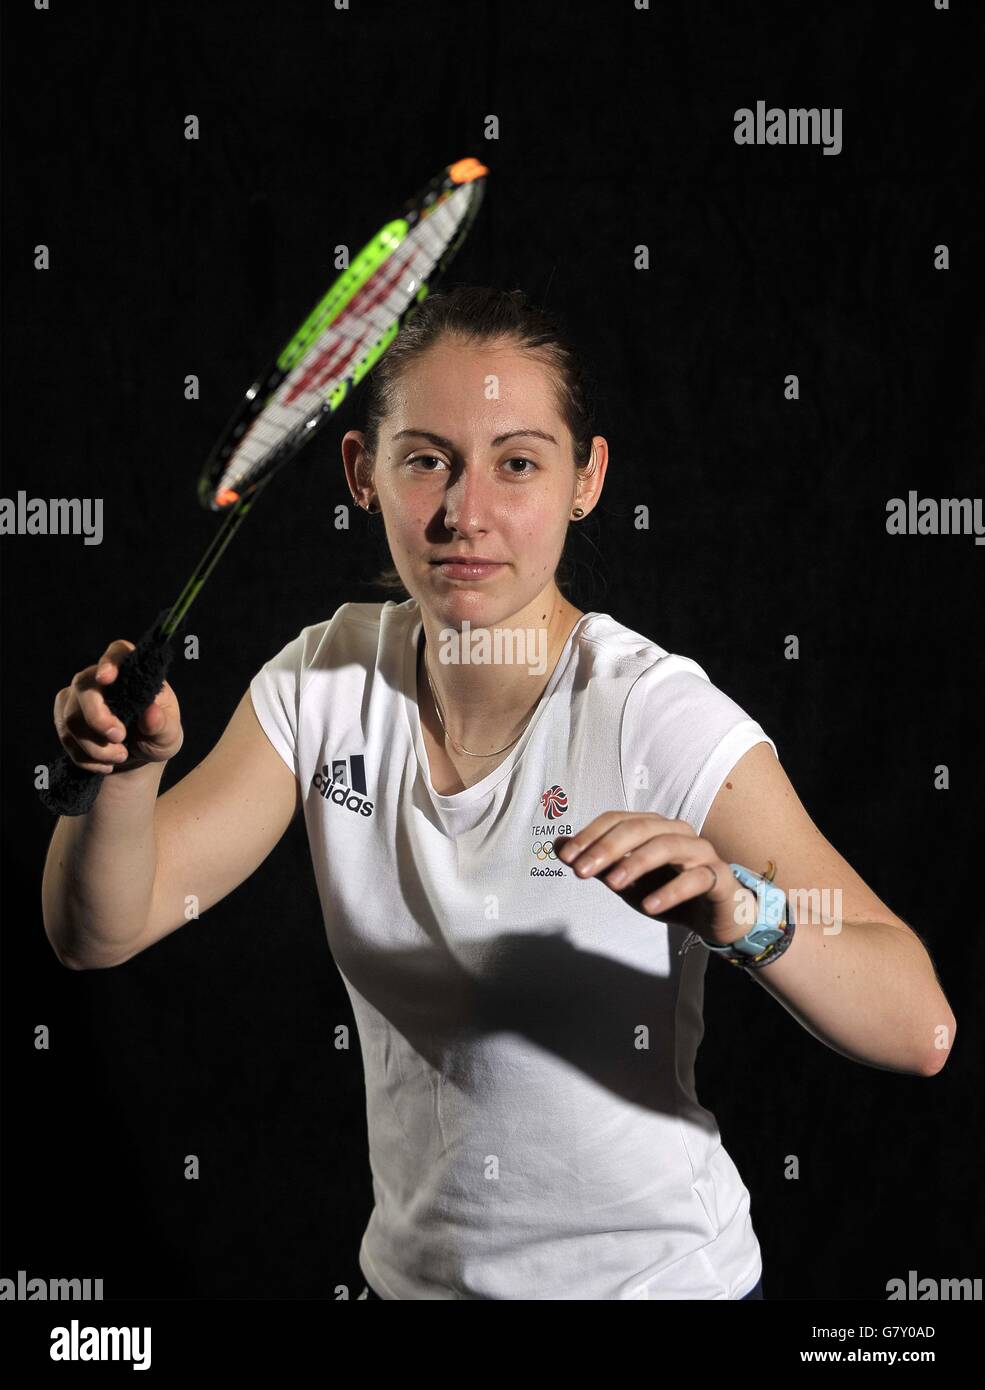 Milton Keynes, UK. 27th June, 2016. Kirsty Gilmour, 22, Bellshill (Women’s singles) . TeamGB announces the badminton team for the Rio2016 Olympics. National Badminton Centre. Milton Keynes. UK. 27/06/2016. Credit:  Sport In Pictures/Alamy Live News Stock Photo